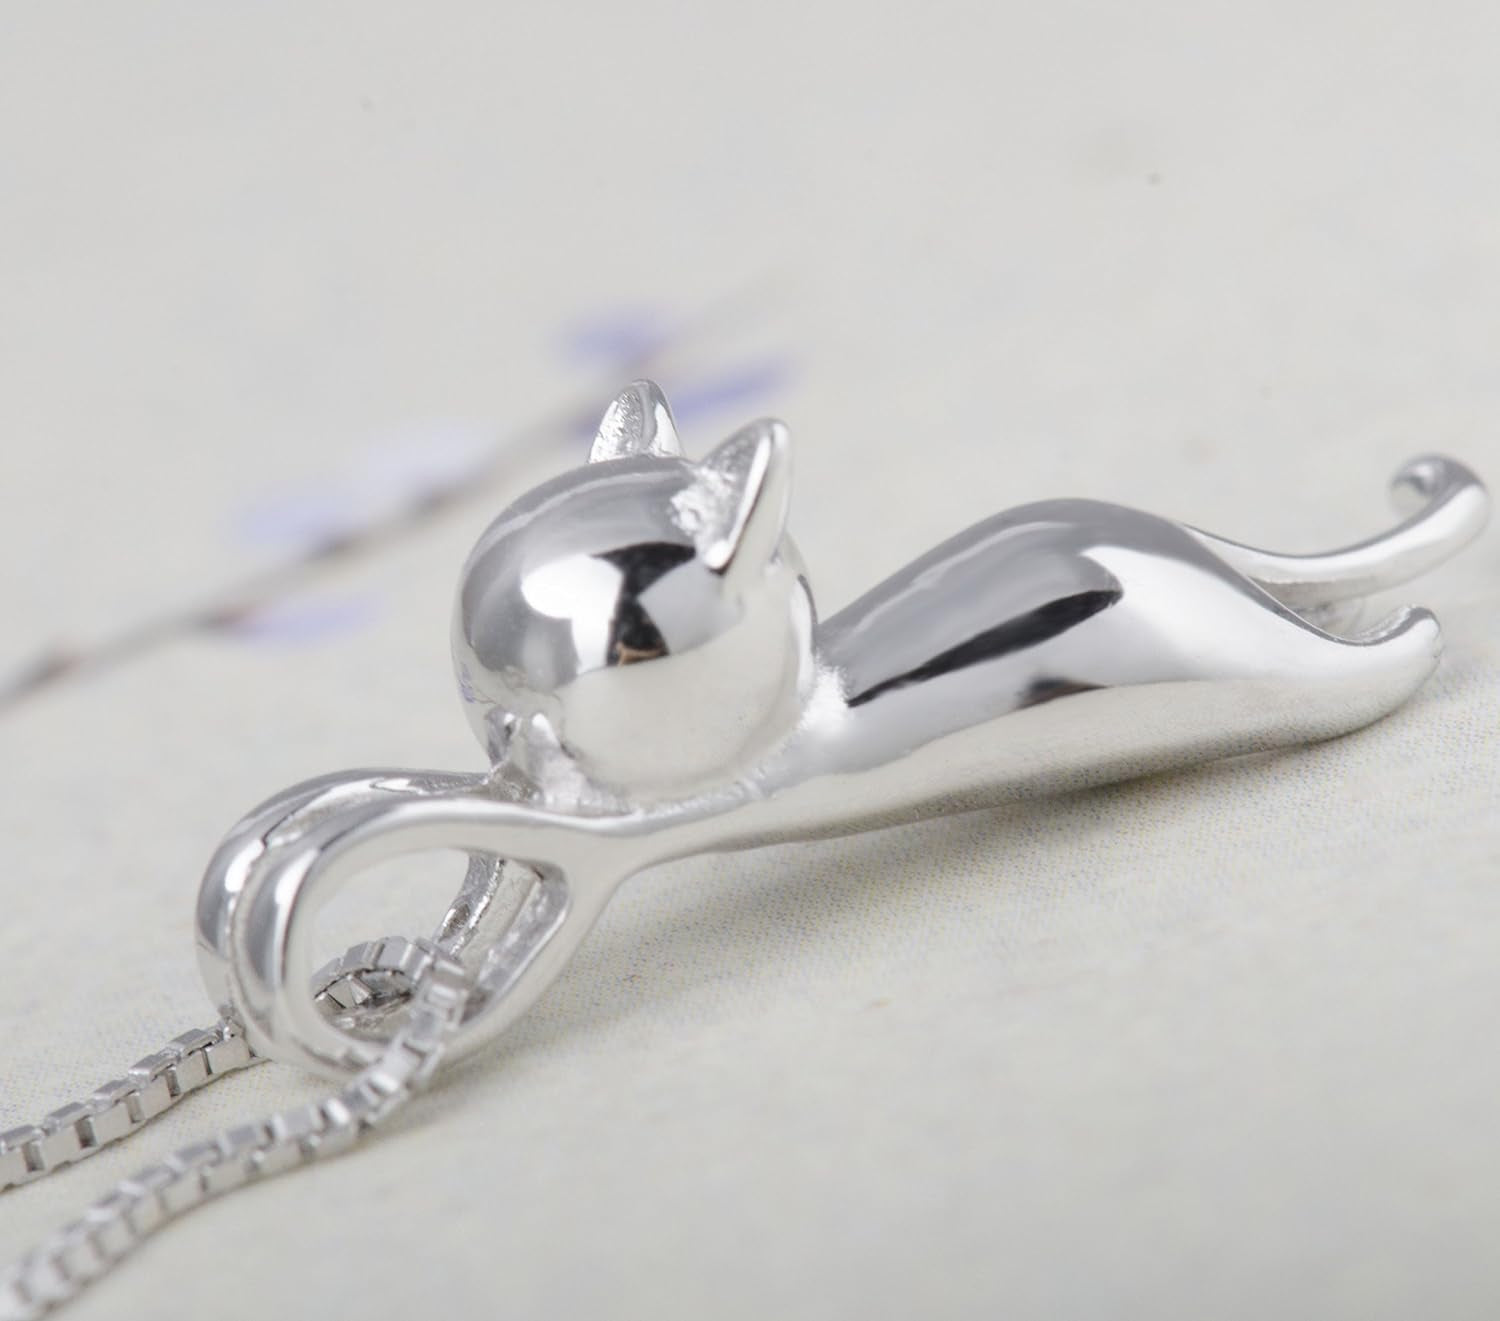 S925 Sterling Silver Cat Necklaces Cat Jewelry for Women Cat Gifts for Cat Lovers Cat Lover Gifts for Women Cat Lady Gifts Silver Cat Pendant Collarbone Necklace